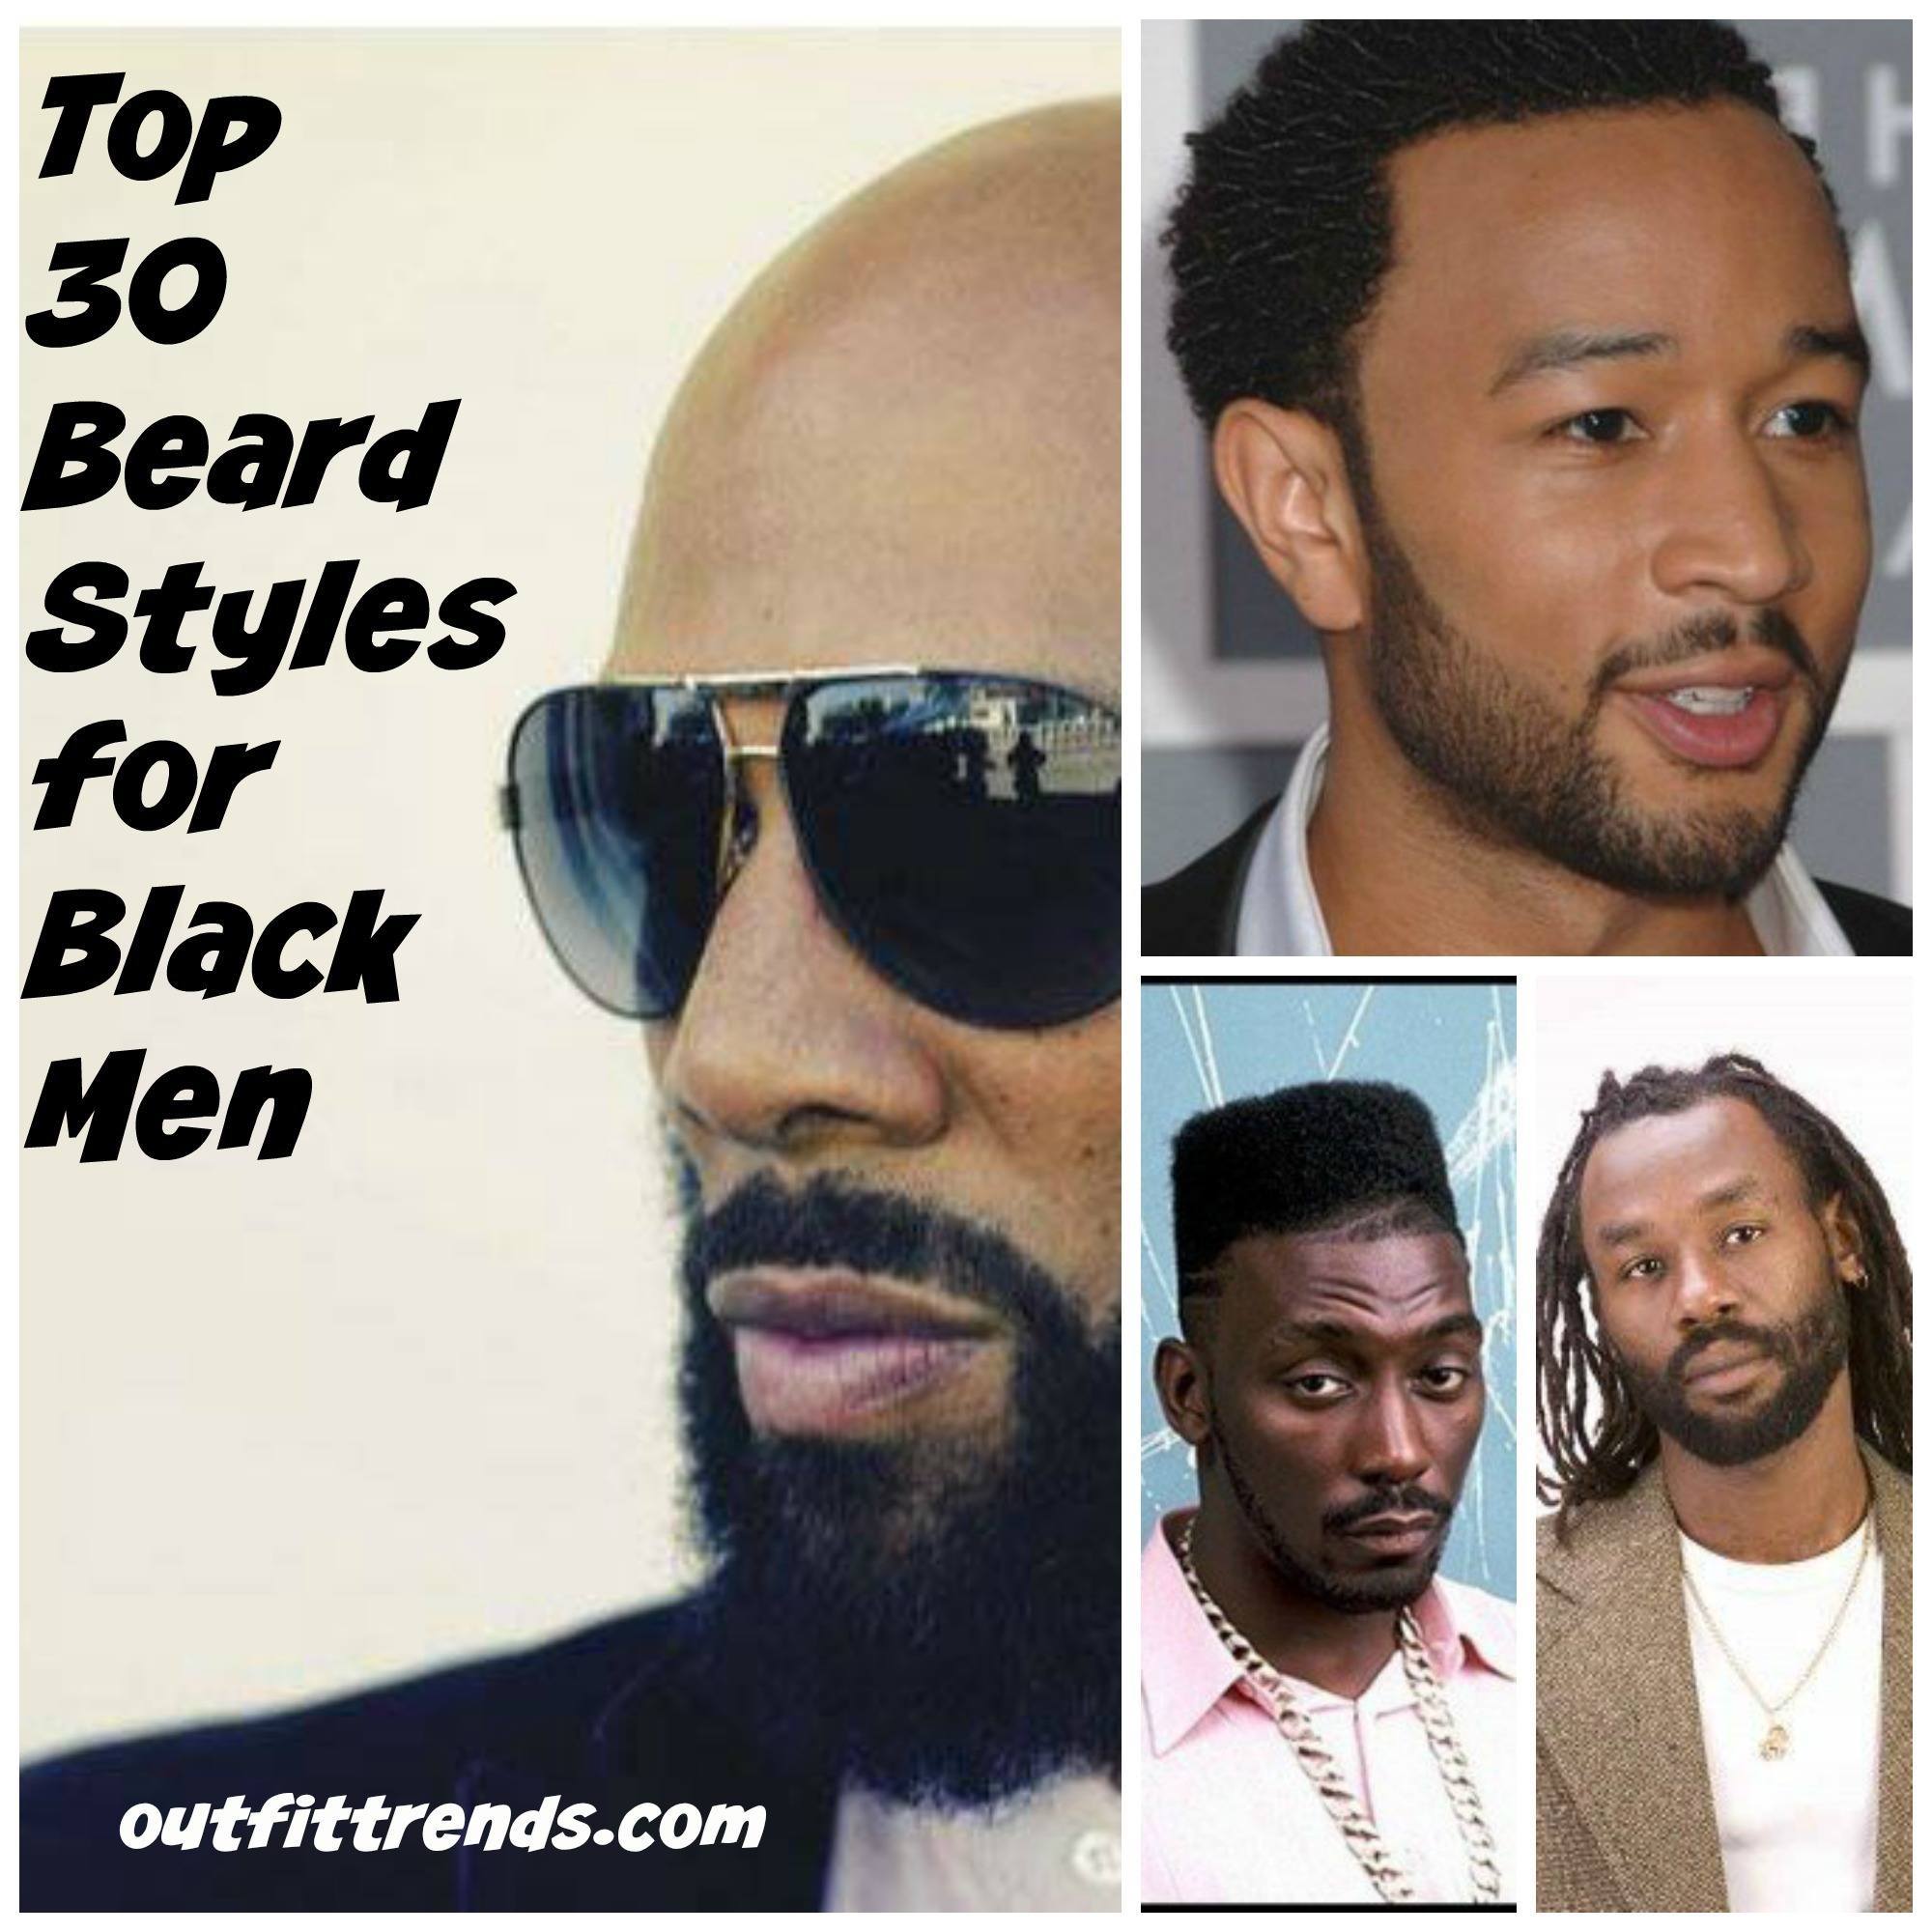 Latest Beard Styles for Black Men – 30 Hottest Facial Hair Styles to Try